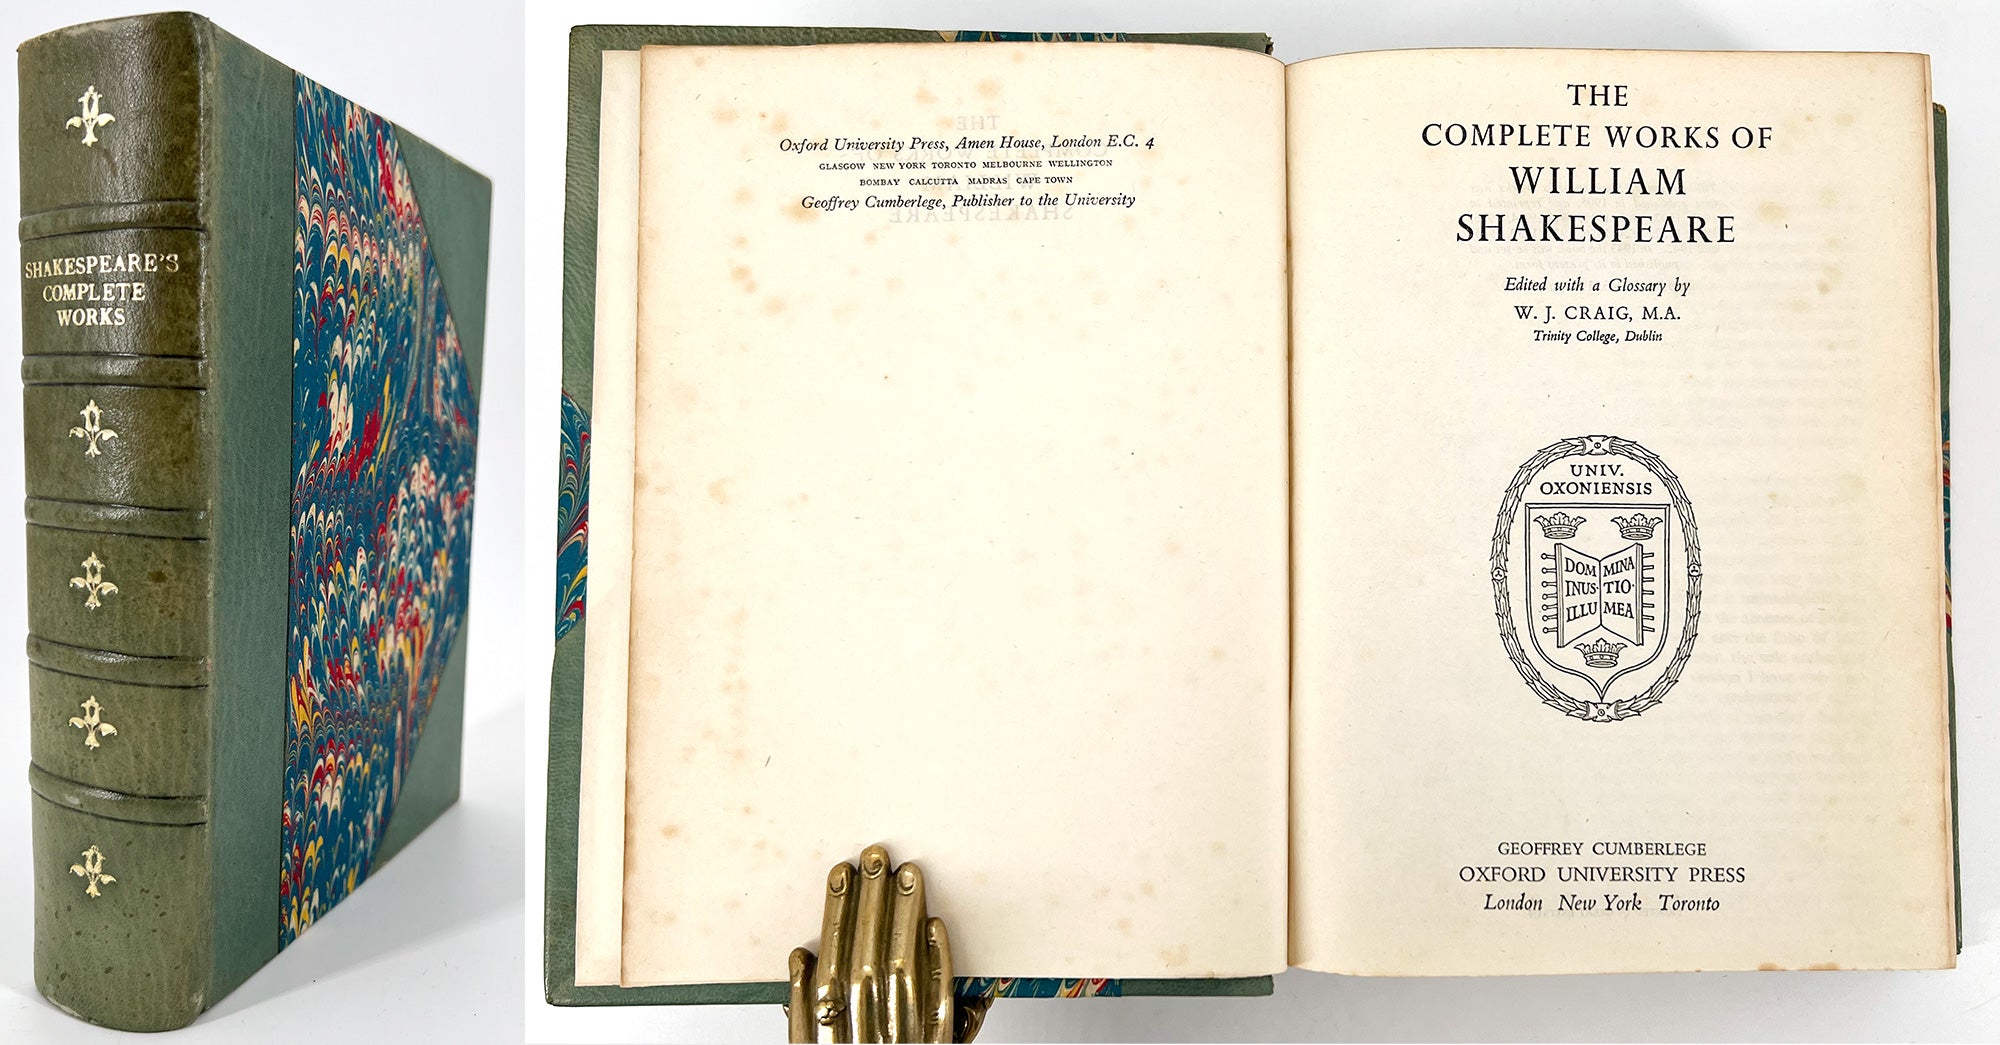 The Complete Works of William Shakespeare; Edited with a Glossary by W. J.  Craig, M.A., Trinity College Dublin by William Shakespeare on Rob Zanger 